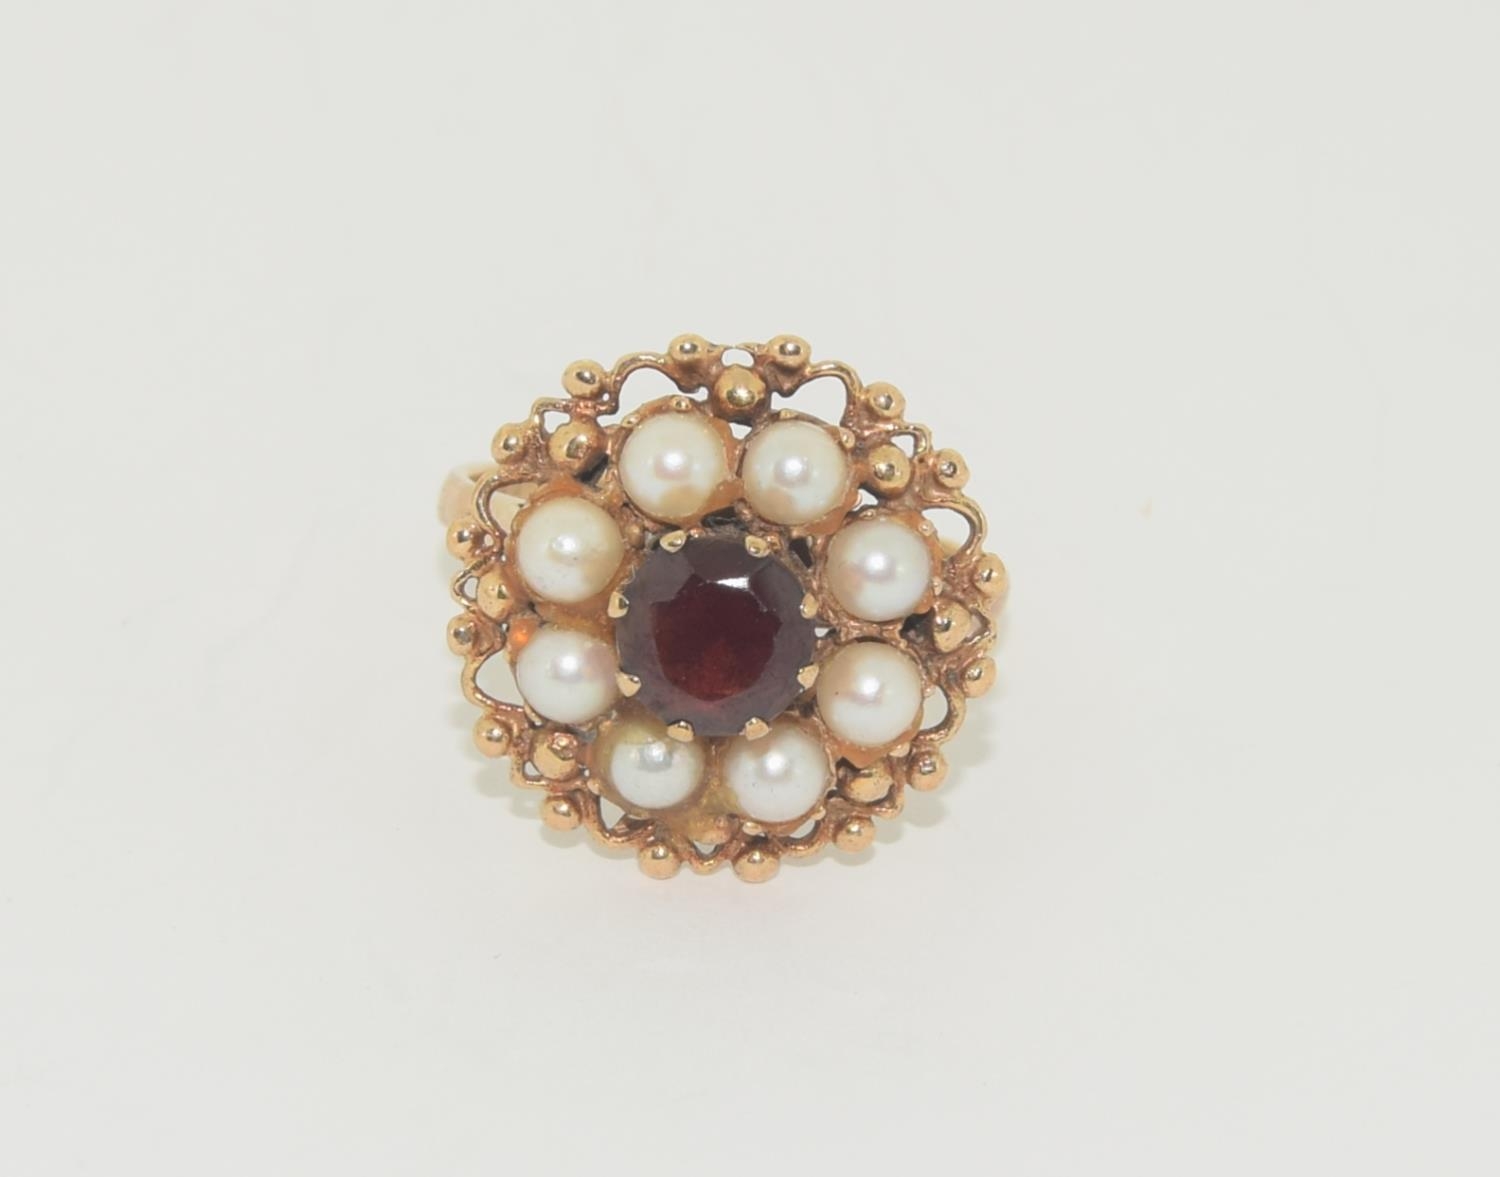 9ct gold ladies antique set garnet and pearl cluster ring size N - Image 5 of 5